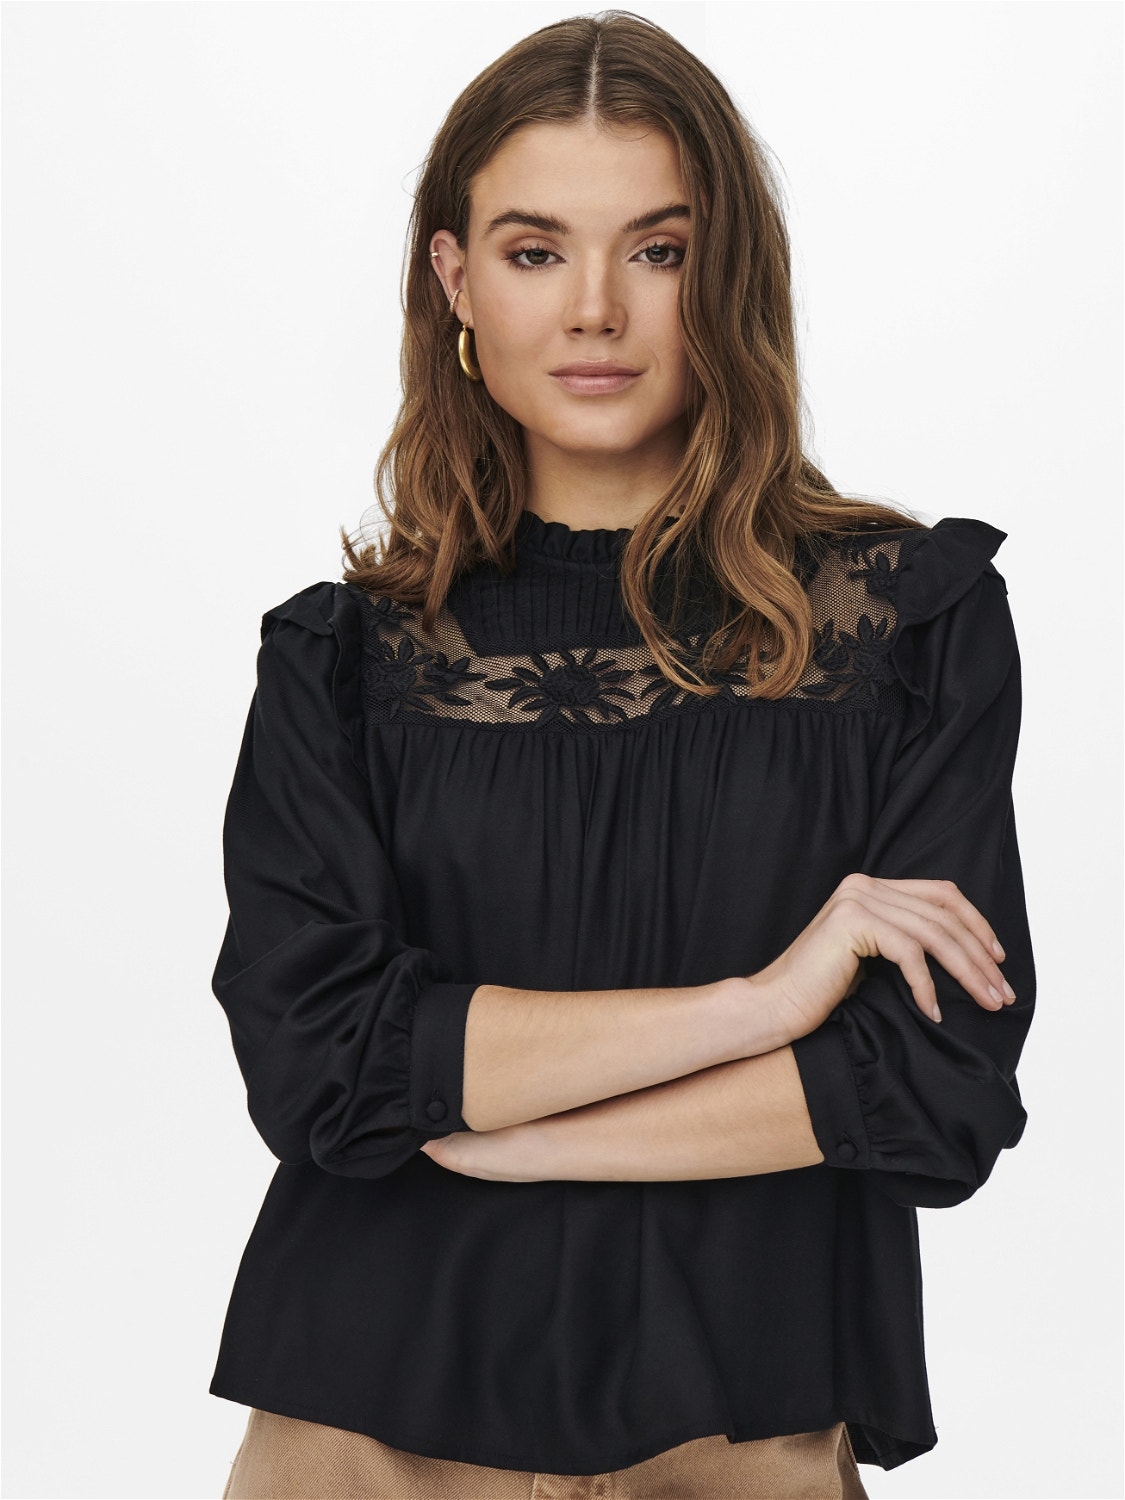 ONLY Regular Fit O-Neck Buttoned cuffs Top -Black - 15245061